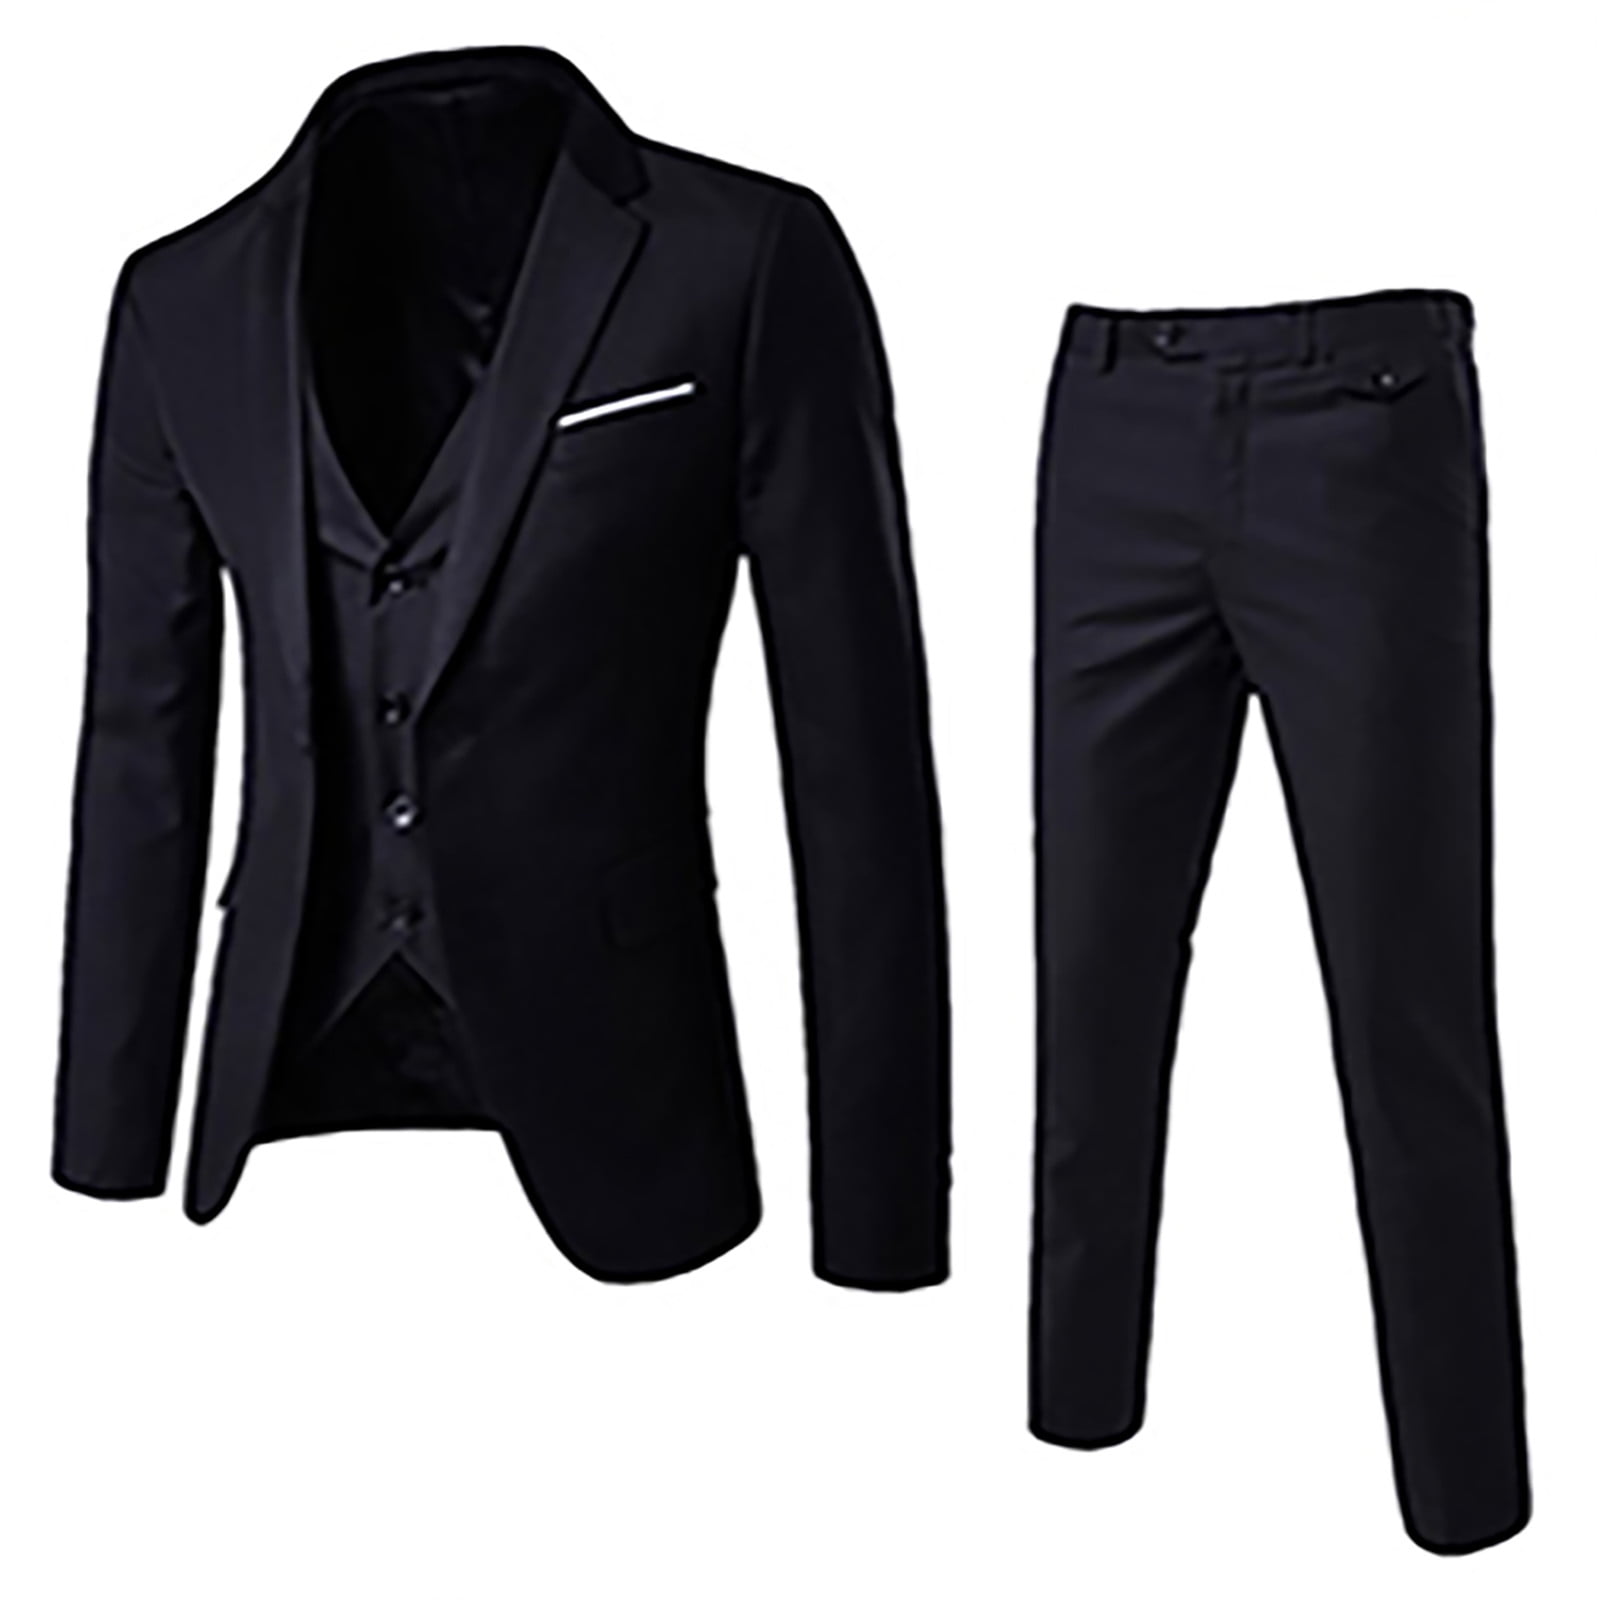 Men Tuxedo suite Formal Dress For Business, Office Party and Groom Wedding